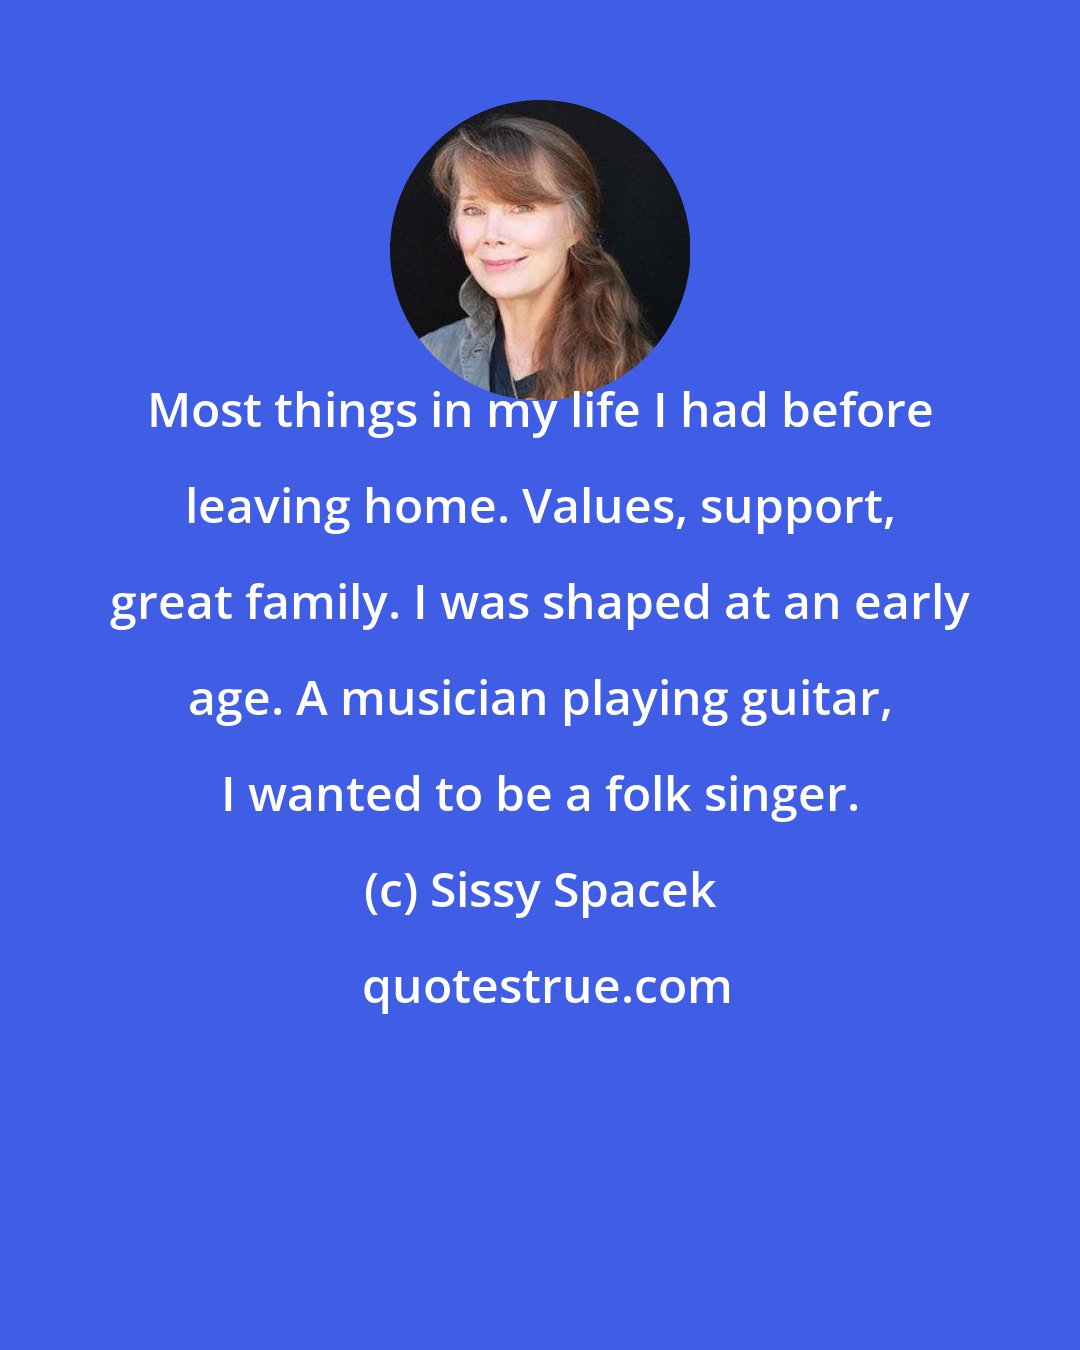 Sissy Spacek: Most things in my life I had before leaving home. Values, support, great family. I was shaped at an early age. A musician playing guitar, I wanted to be a folk singer.